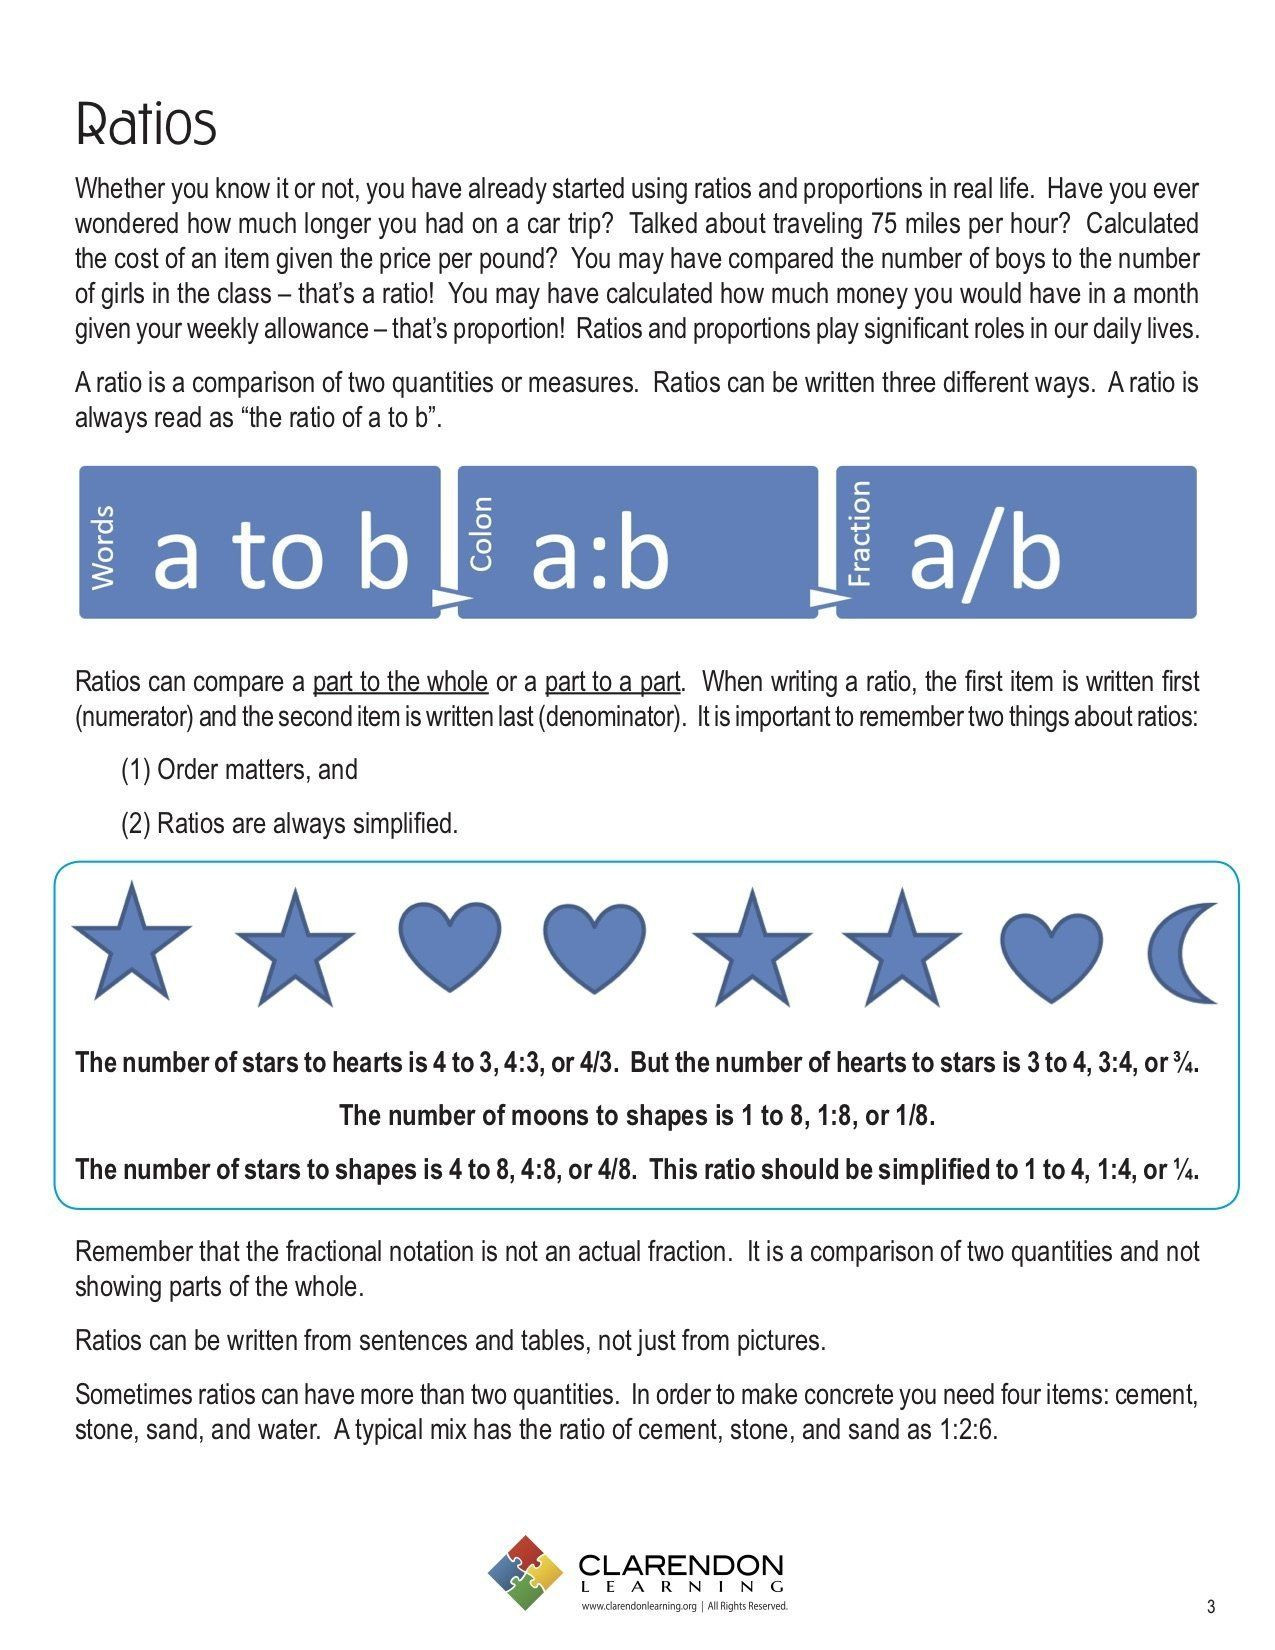 Ratio and Proportion Worksheet 32 6th Grade Ratios Worksheet In 2020